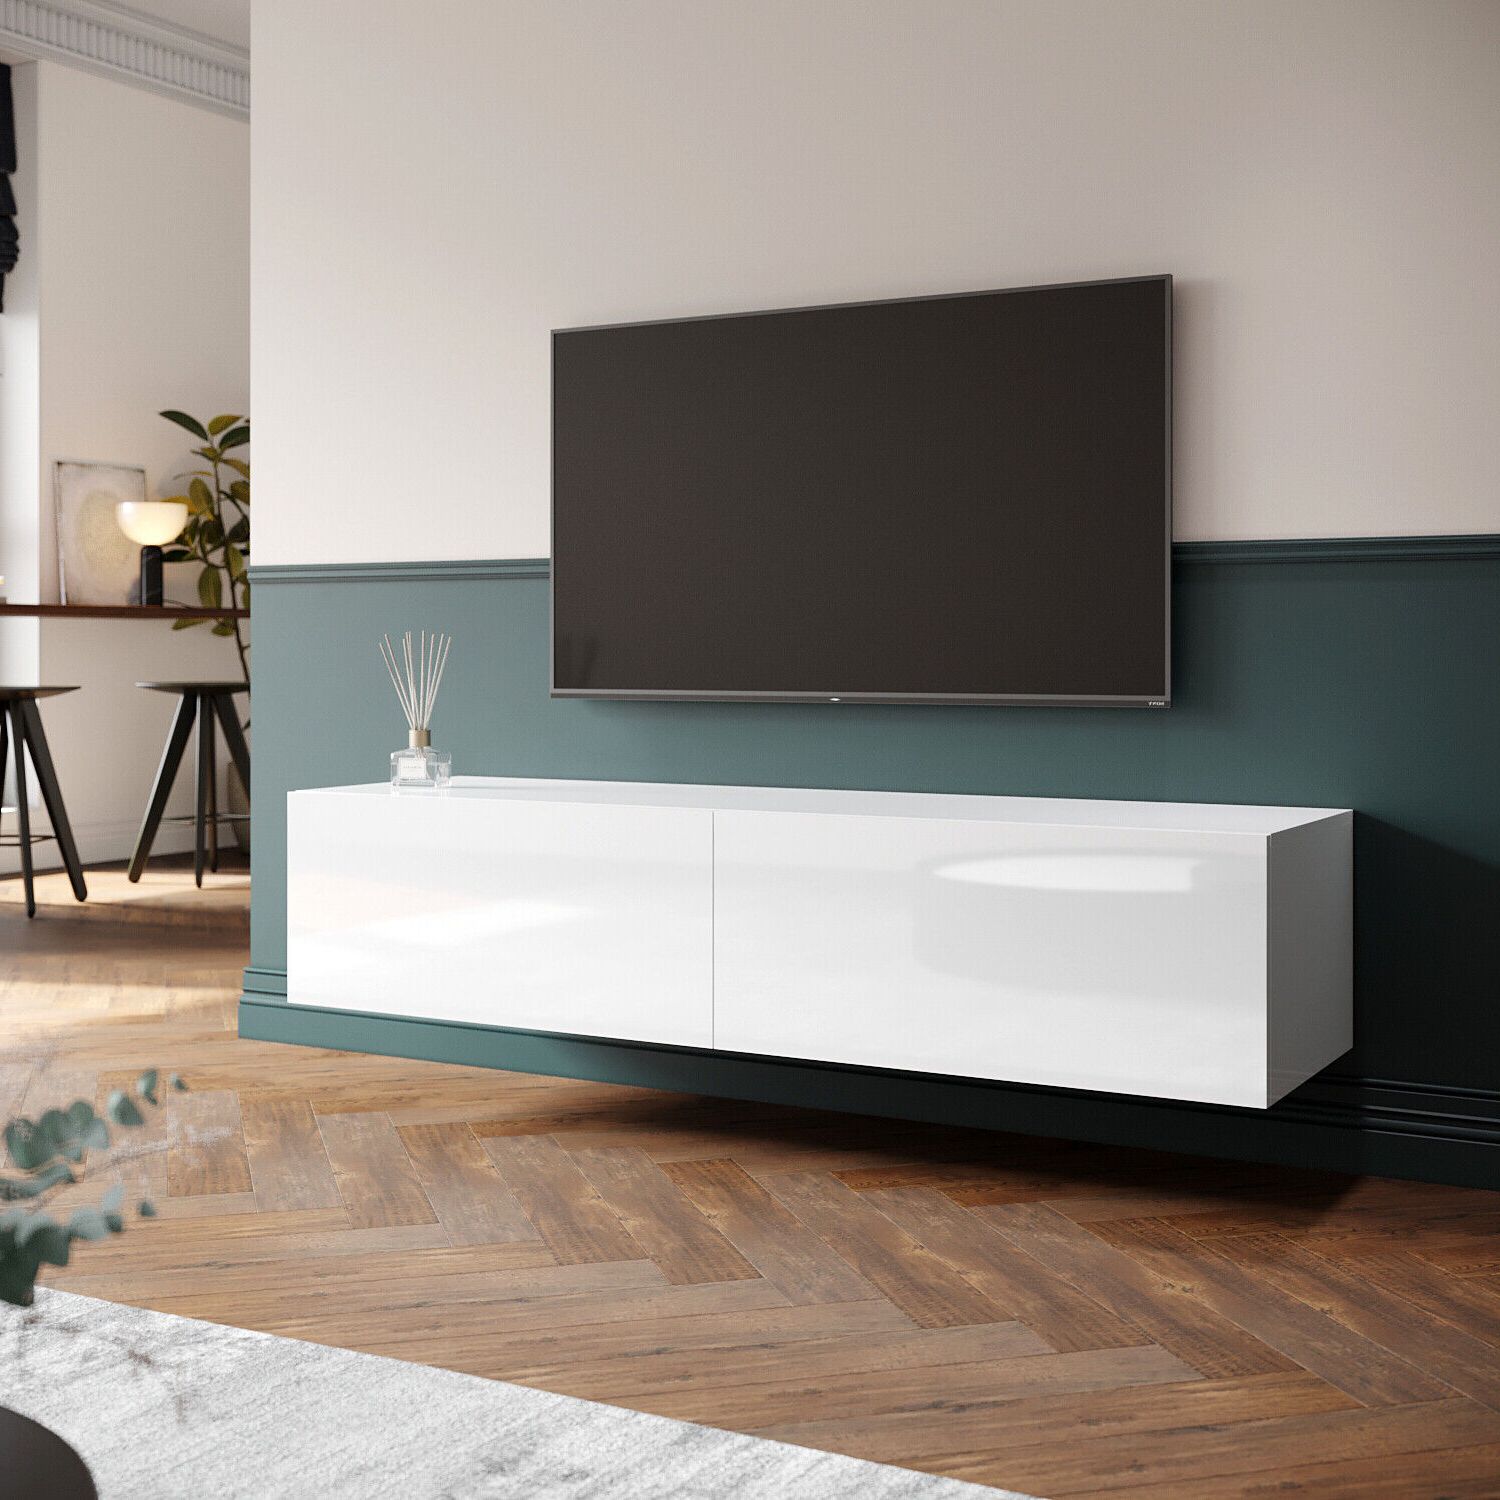 White Floating Tv Unit Cabinet Wall Mounted High Gloss Entertainment Unit  140cm | Ebay Regarding Wall Mounted Floating Tv Stands (Gallery 3 of 20)